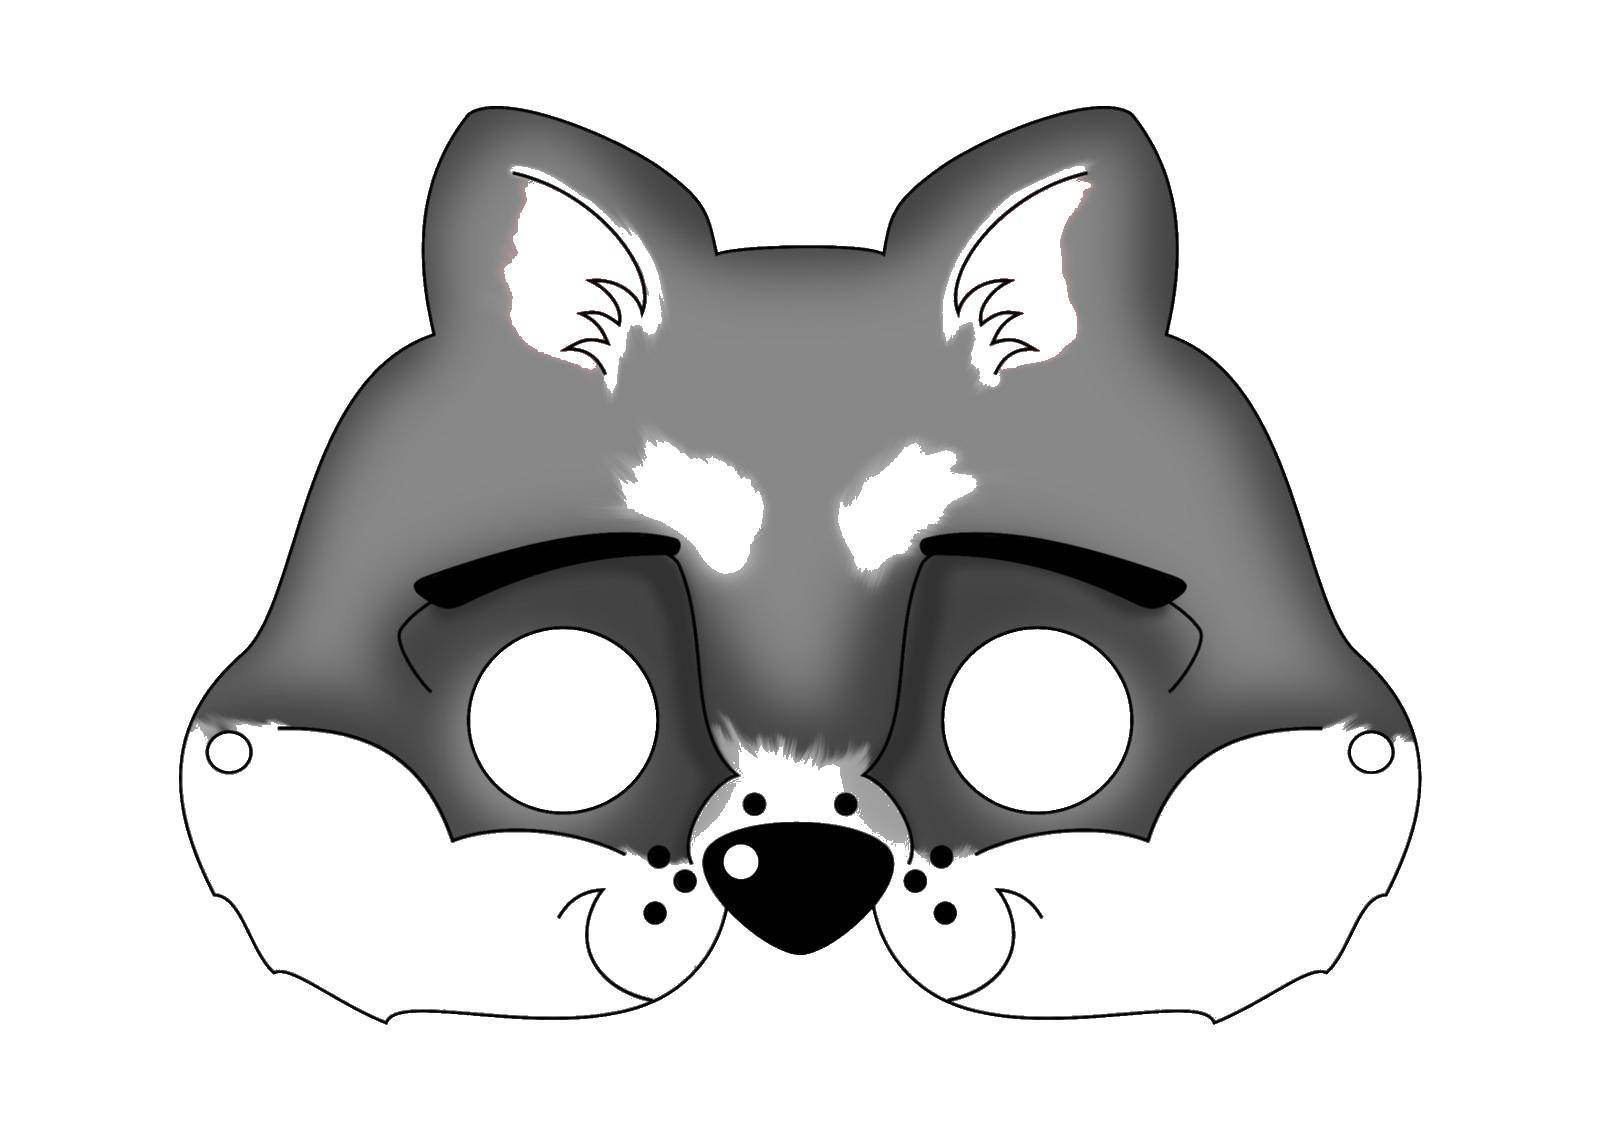 Coloring The wolf mask. Category Masks . Tags:  Mask, Wolf.